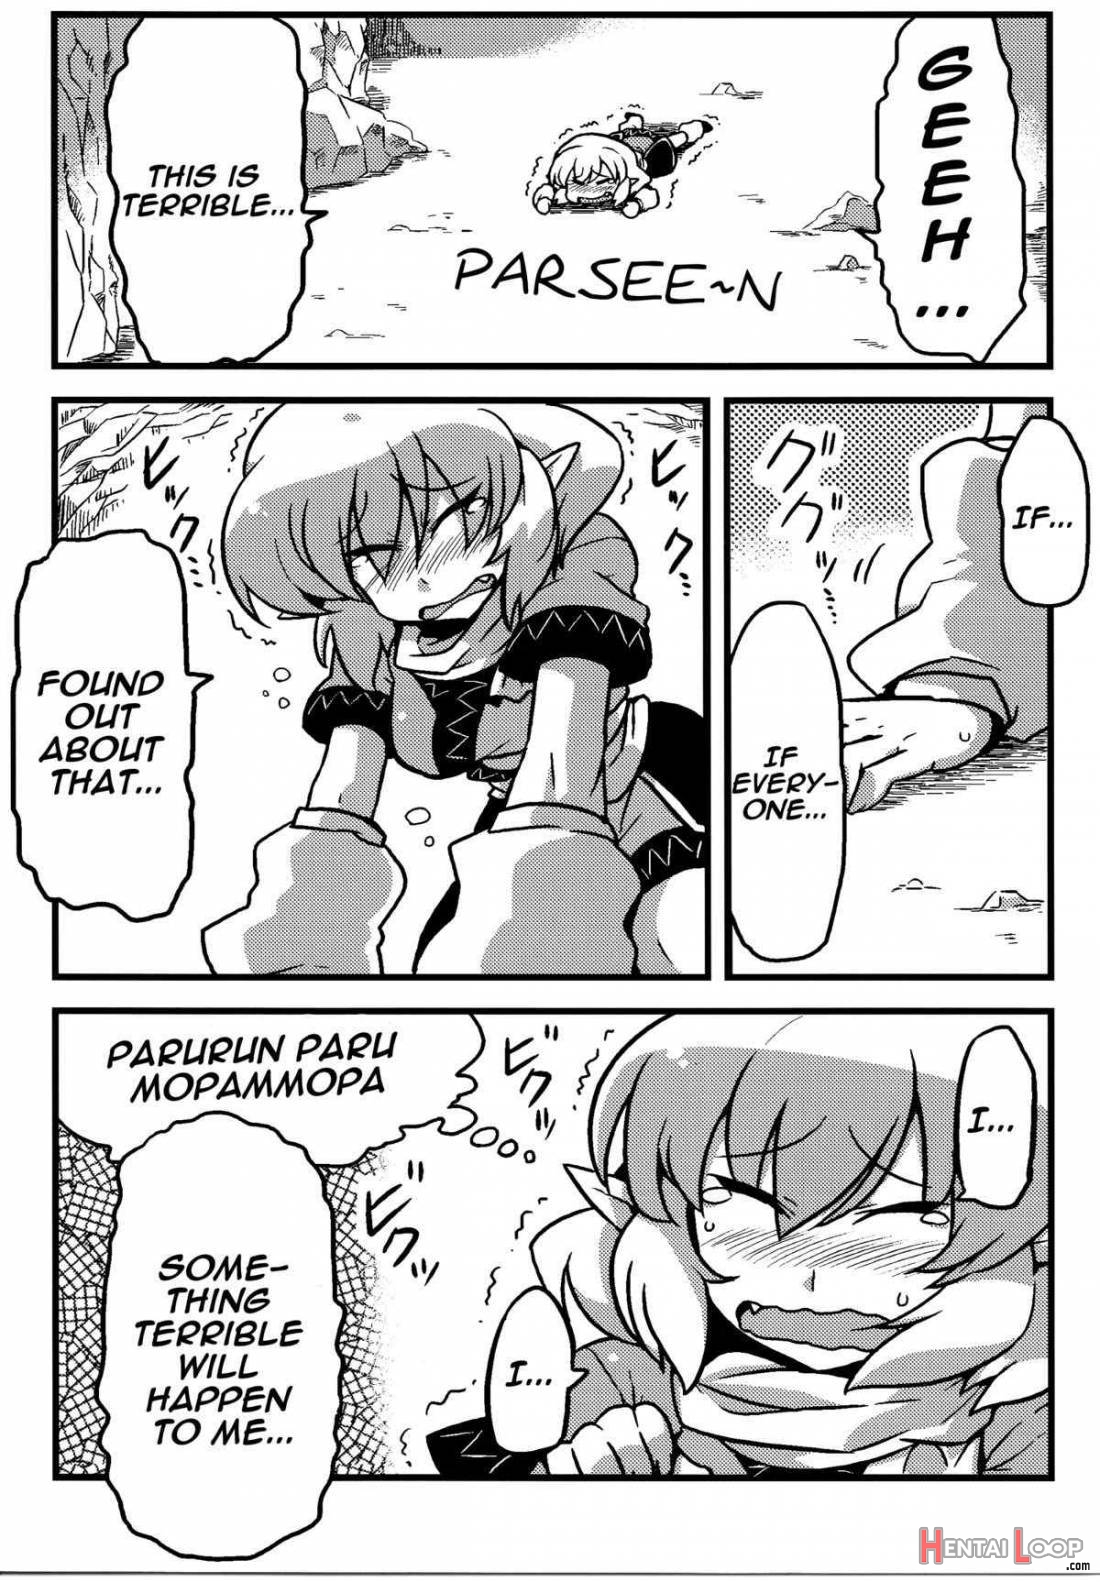 Parsee Netami Mousou page 23